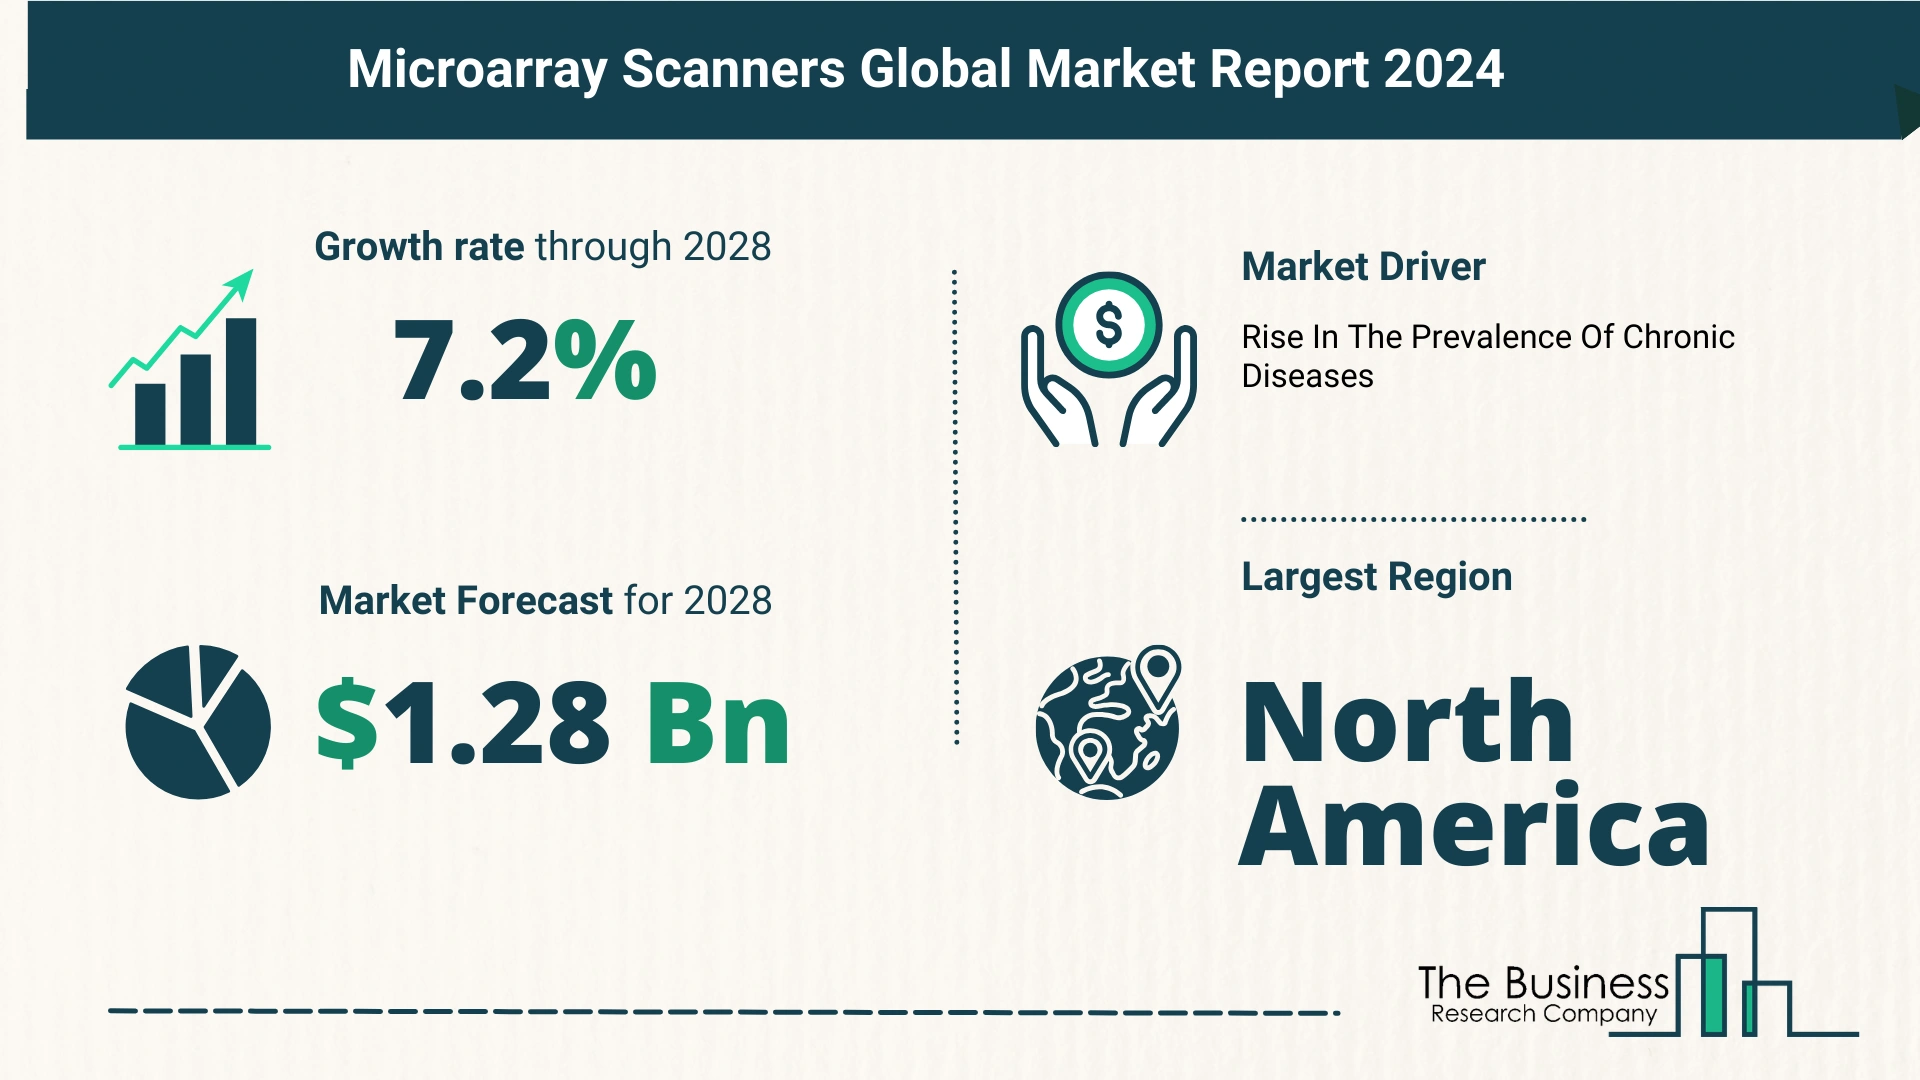 Microarray Scanners Market Report 2024: Market Size, Drivers, And Trends